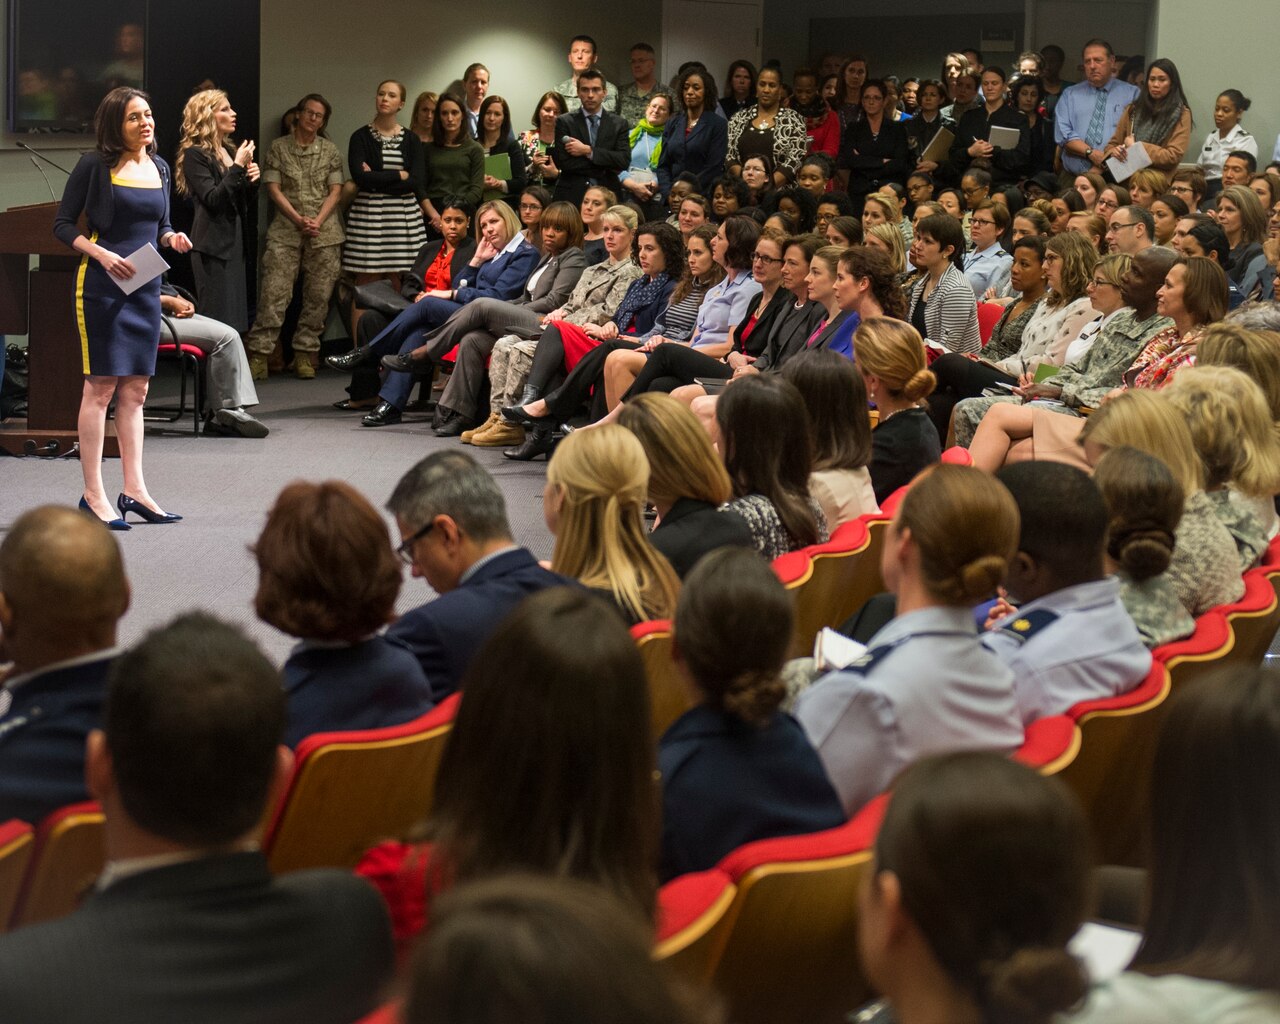 Sheryl Sandberg, founder of Lean In, speaks at the Pentagon  April 9, 2015. Sandberg spoke about how diverse leadership teams make better decisions. U.S. Army photo by Staff Sgt. Chuck Burden